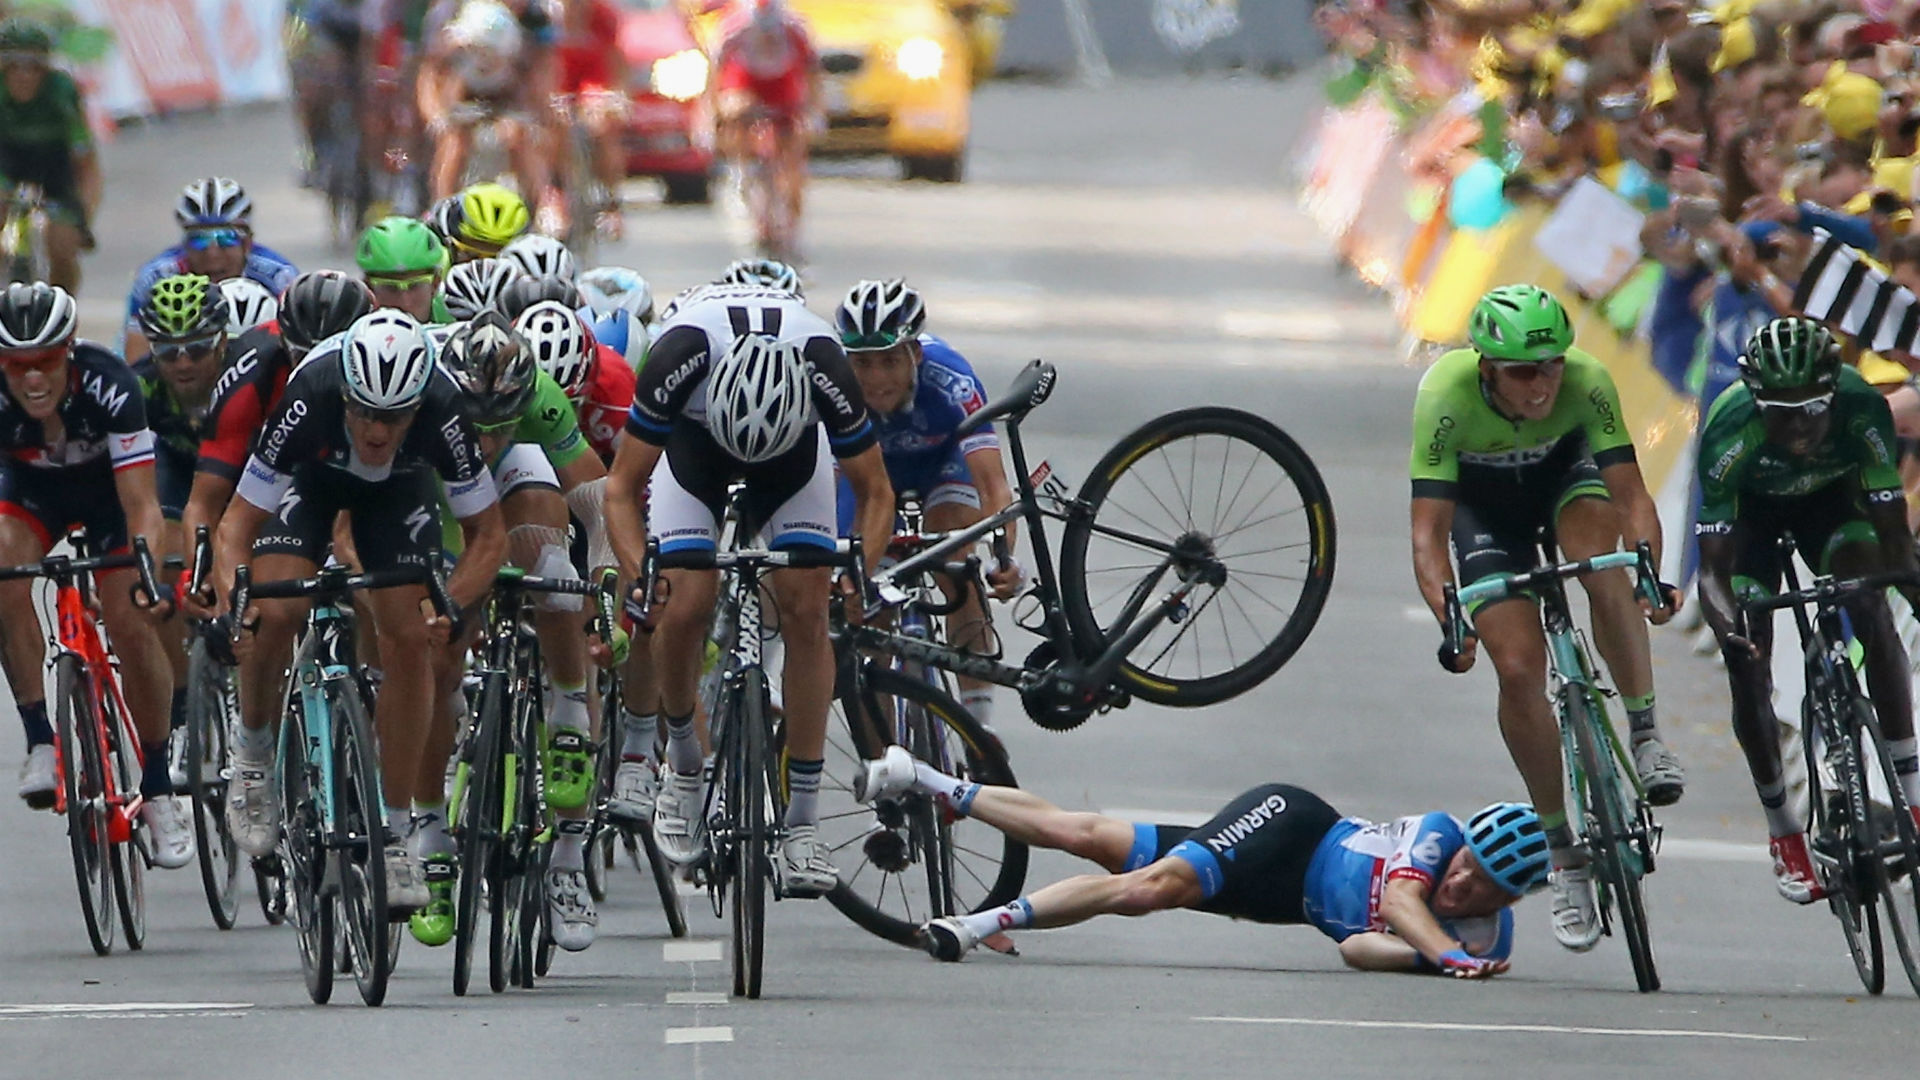 Remembering some of the biggest crashes in Tour de France history